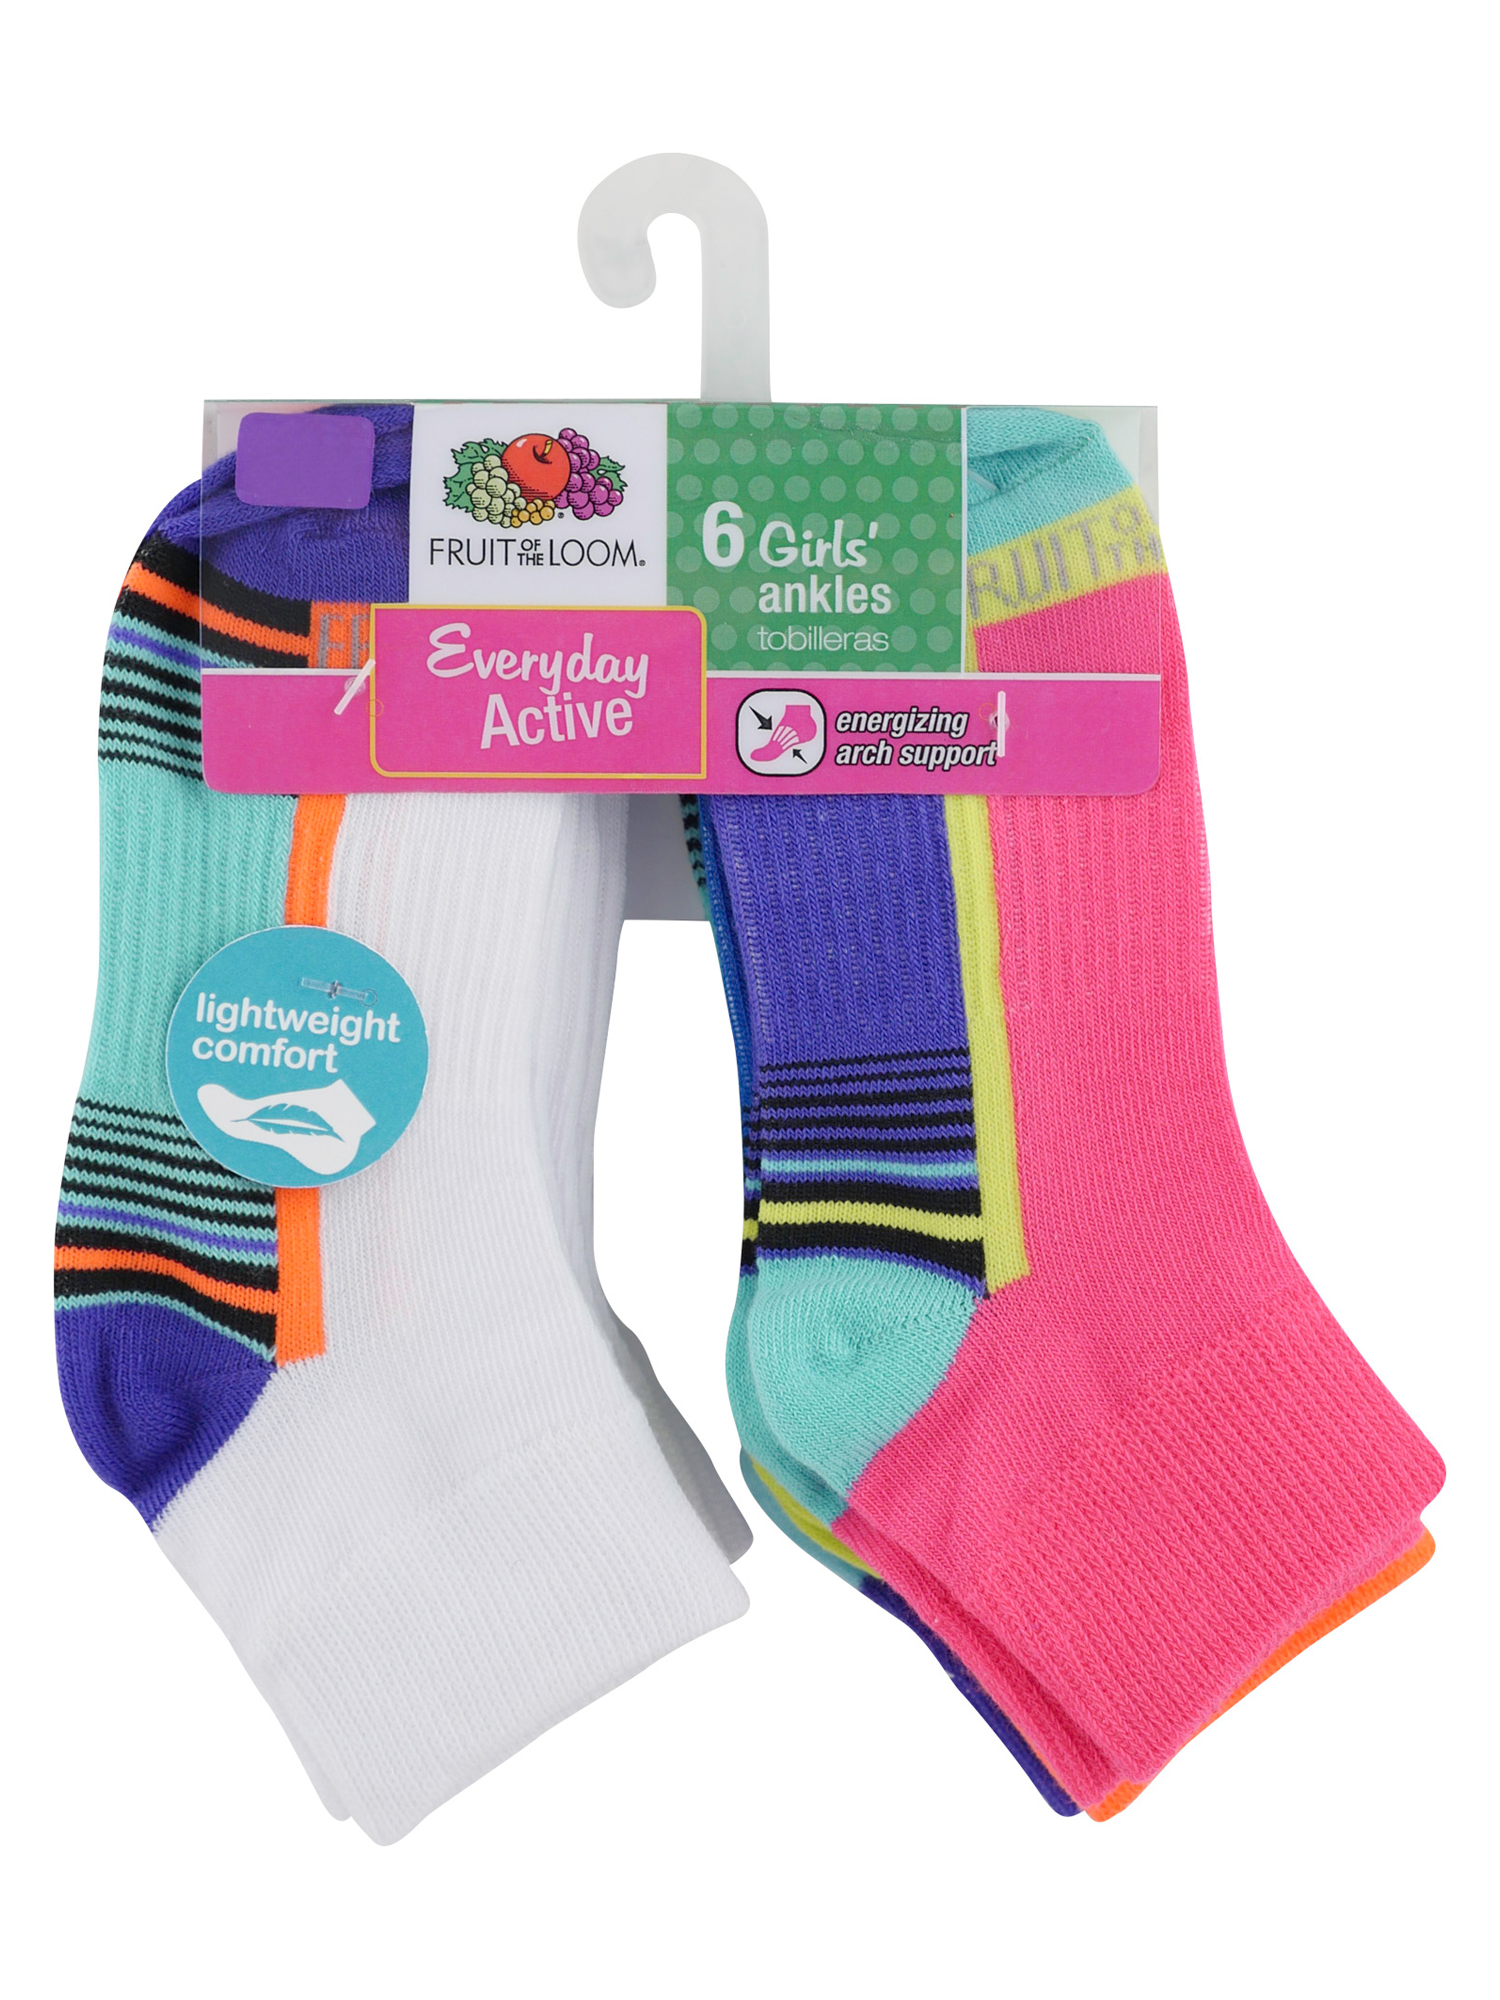 Fruit of the Loom Girls Ankle Socks 6-Pack, Sizes S-L - image 3 of 4